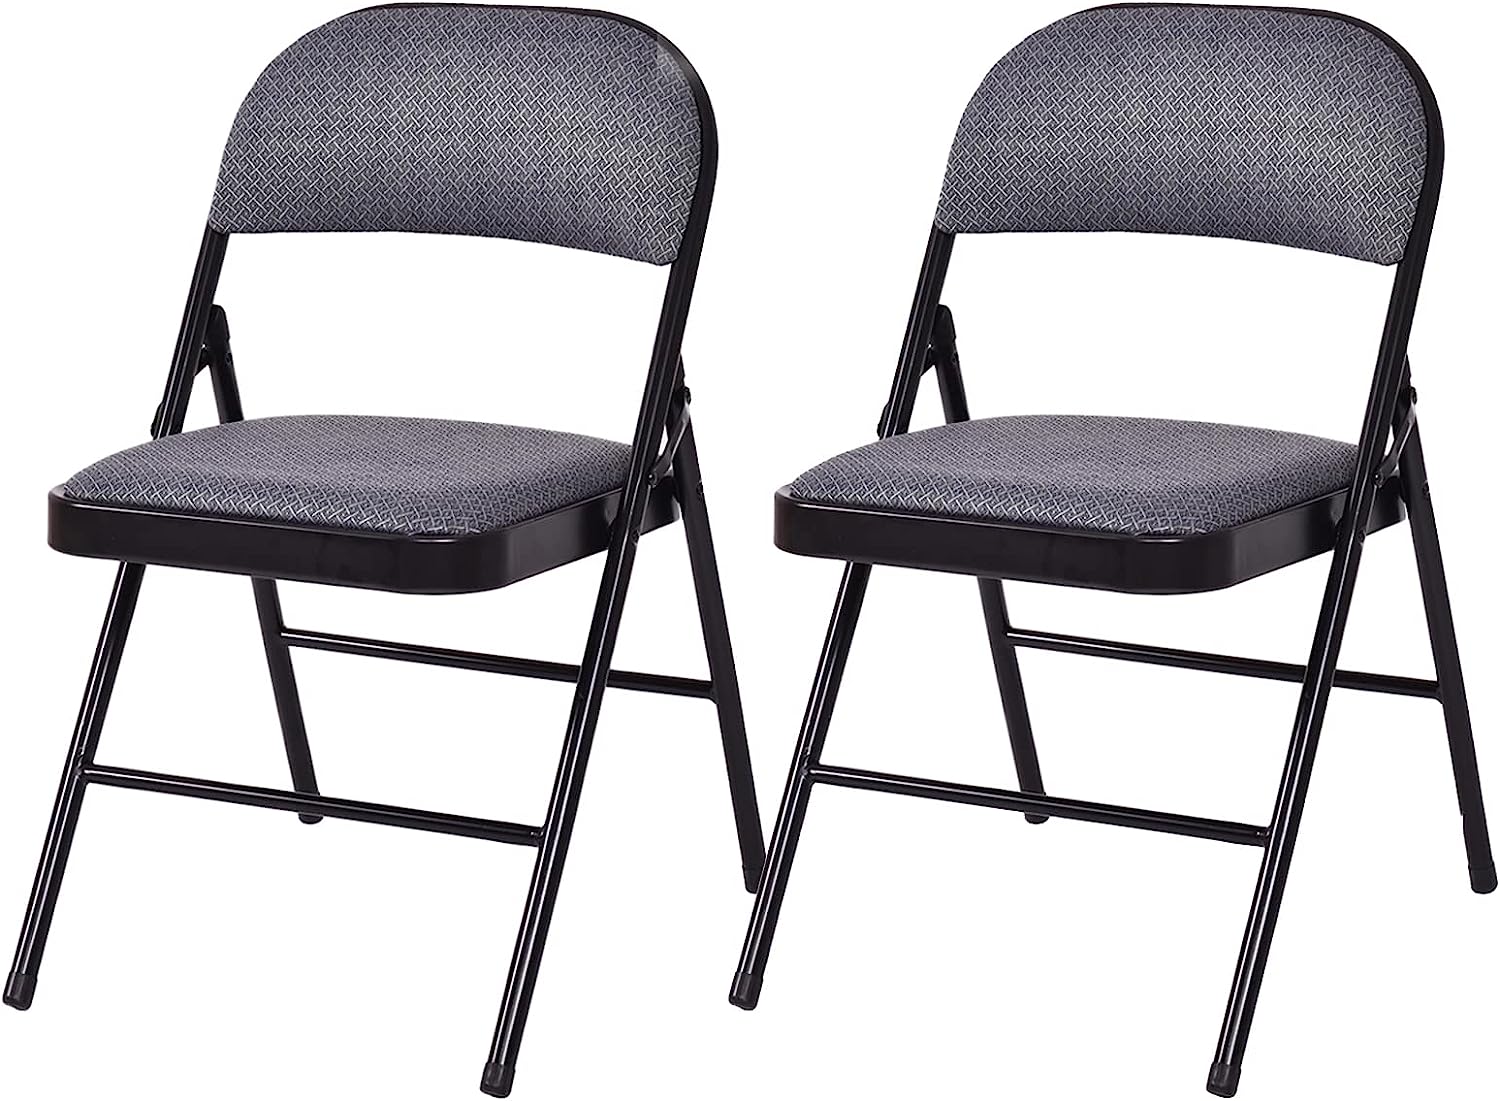 4-Pack Folding Chairs with Metal Frame and Fabric Upholstered Padded Seat